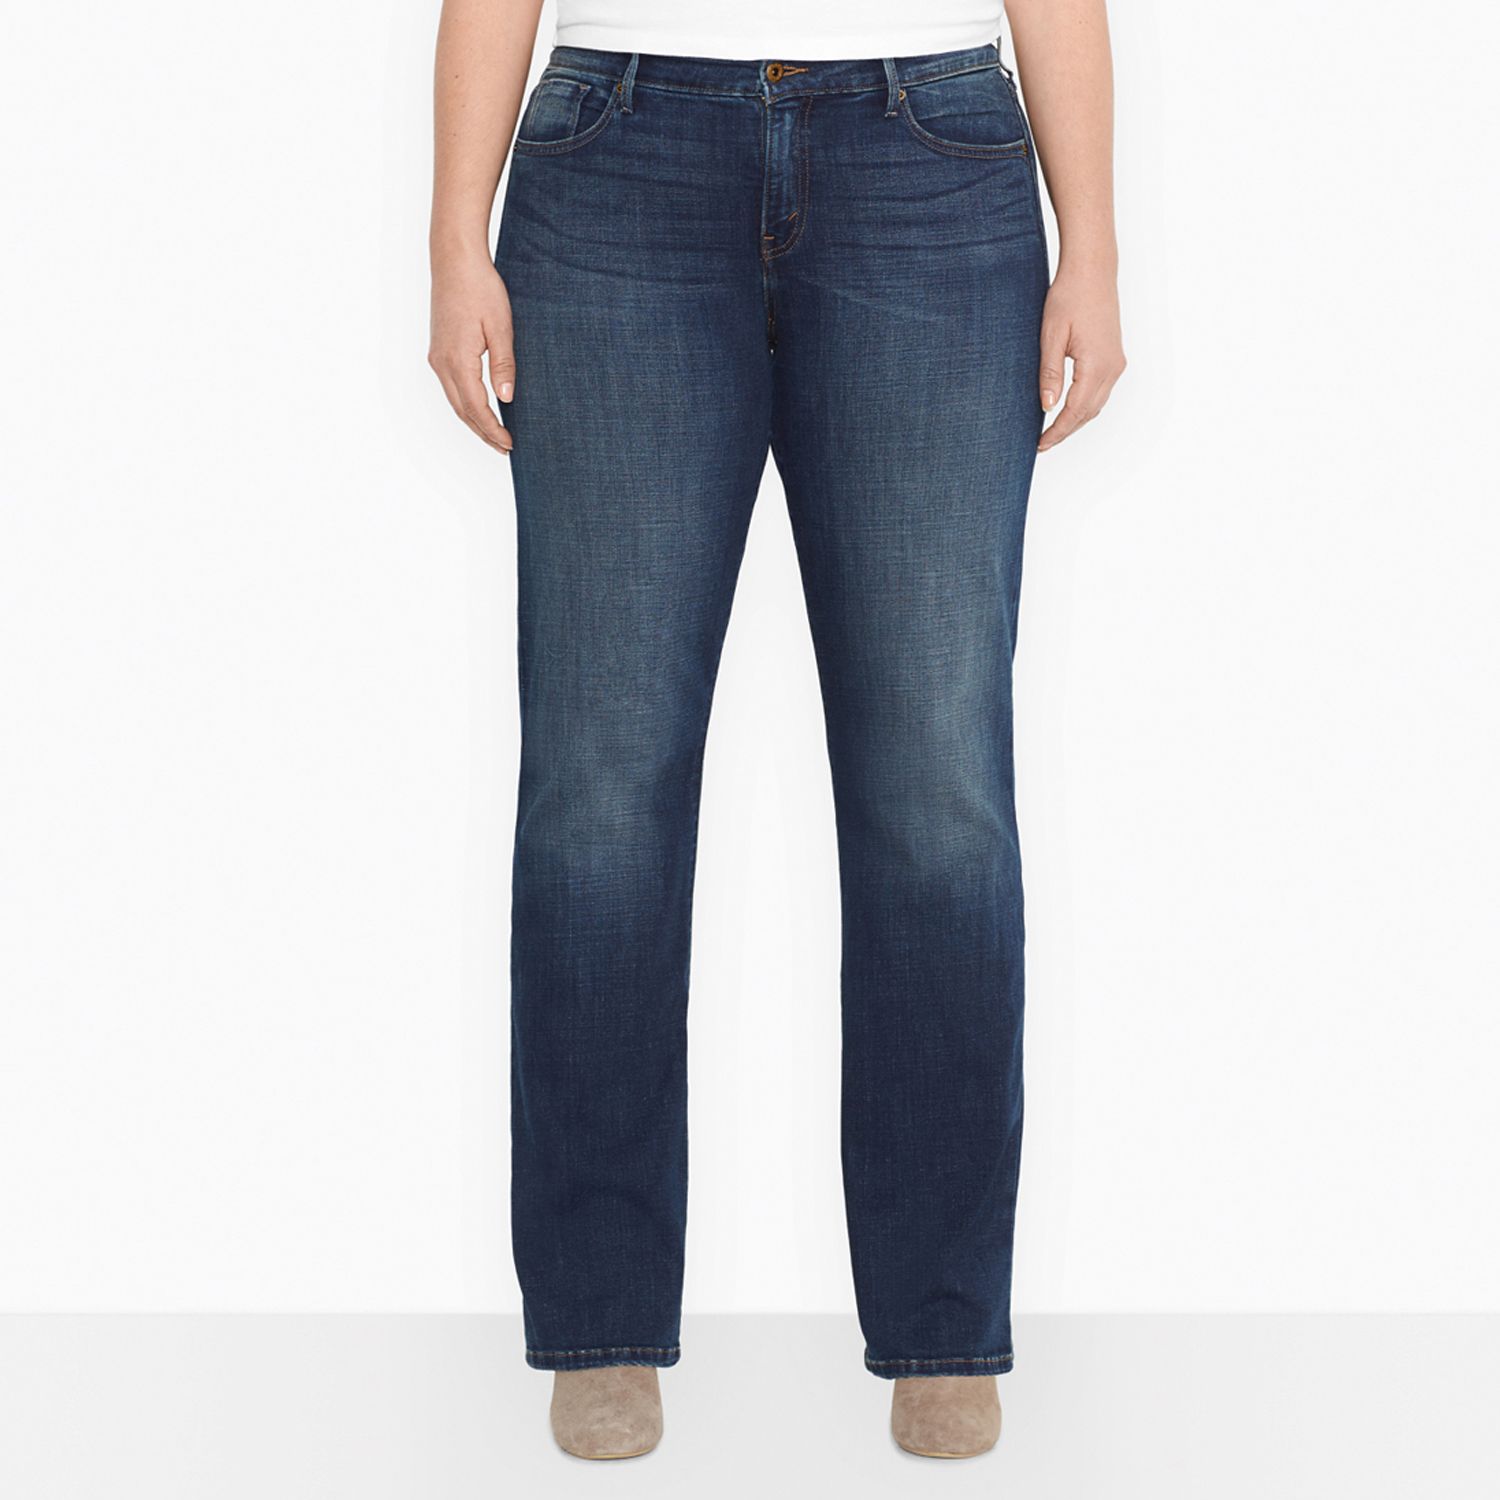 levi's 512 perfectly slimming bootcut jeans